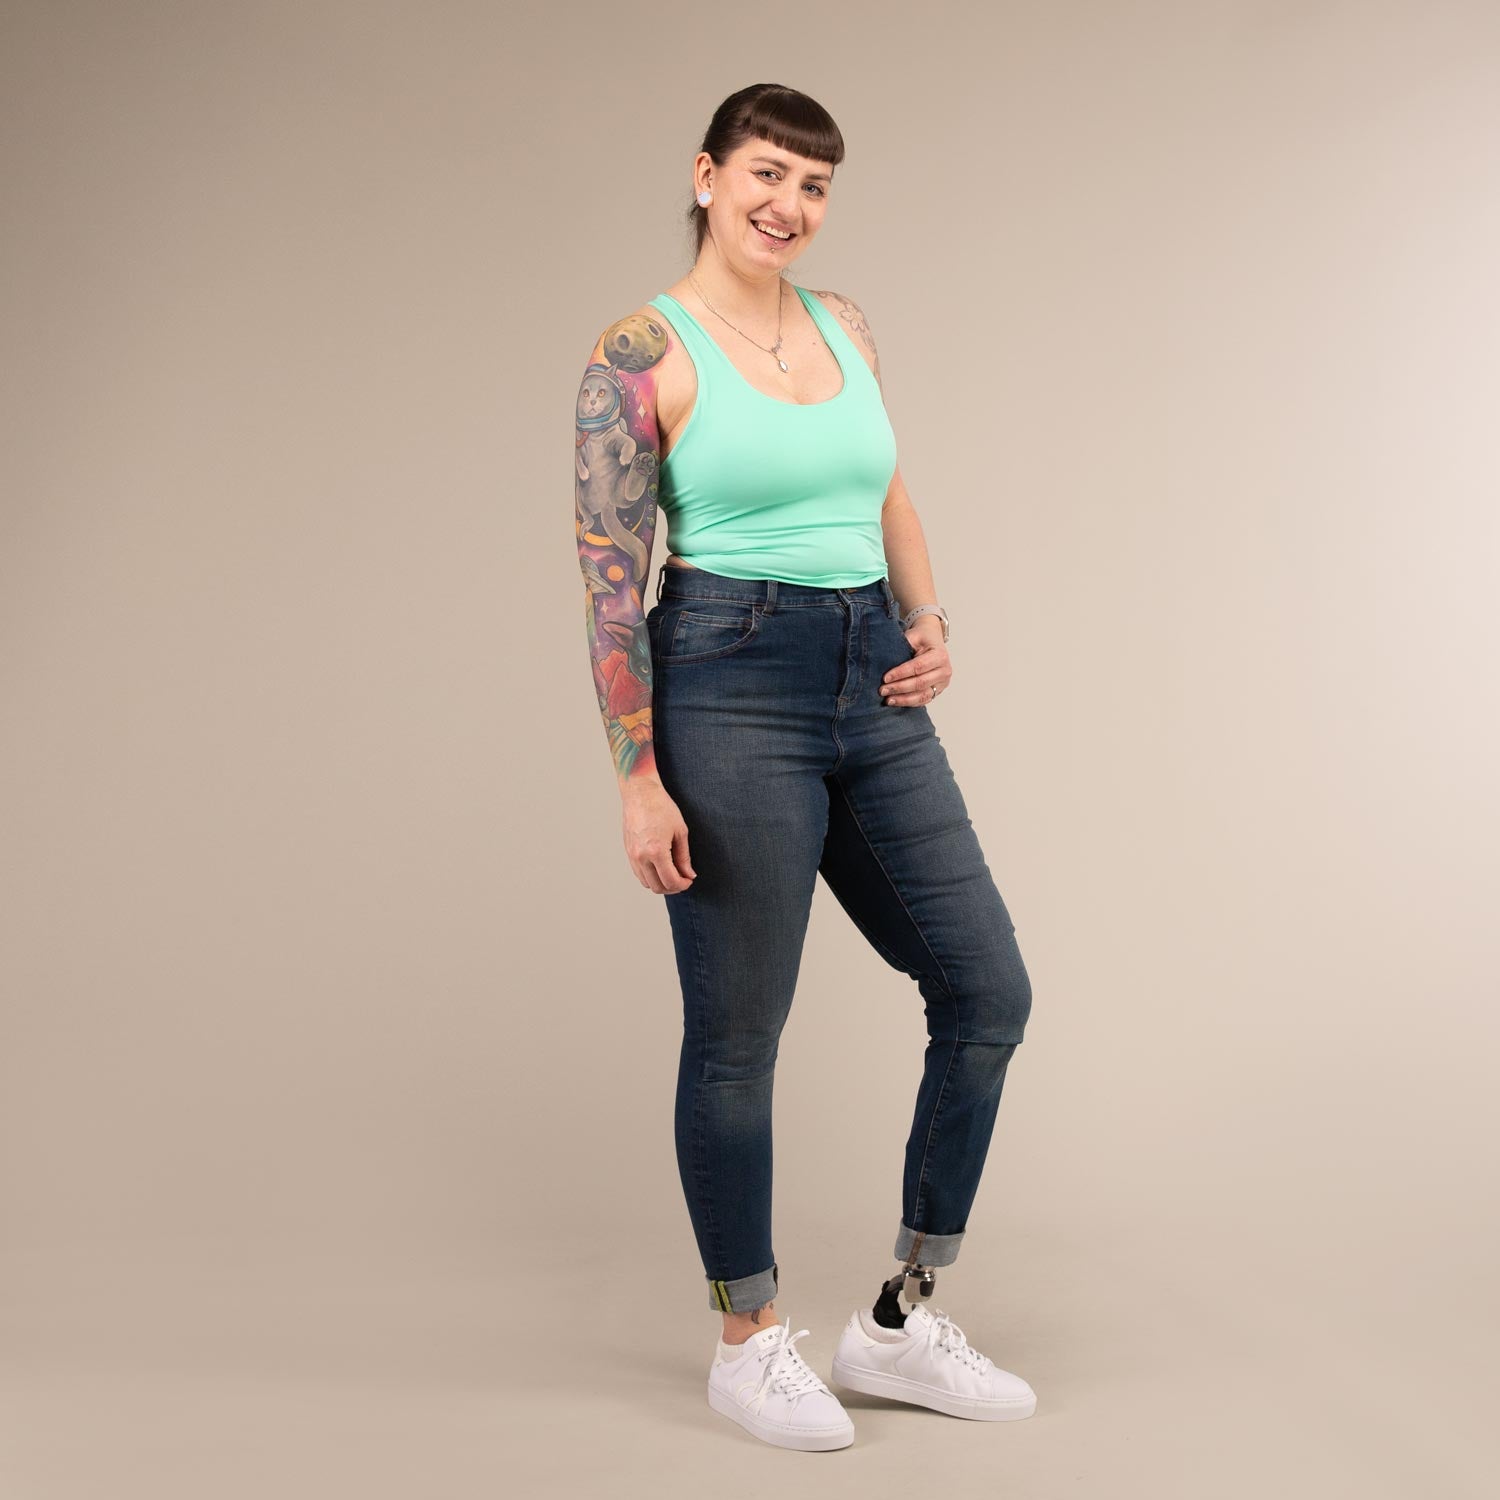 MARPLE JEANS | Skinny Cut Stretchy Sustainable Jeans | 3RD ROCK Clothing -  Laura is 5ft 6 with a 31" waist, 43" hips and wears a size 32/RL F